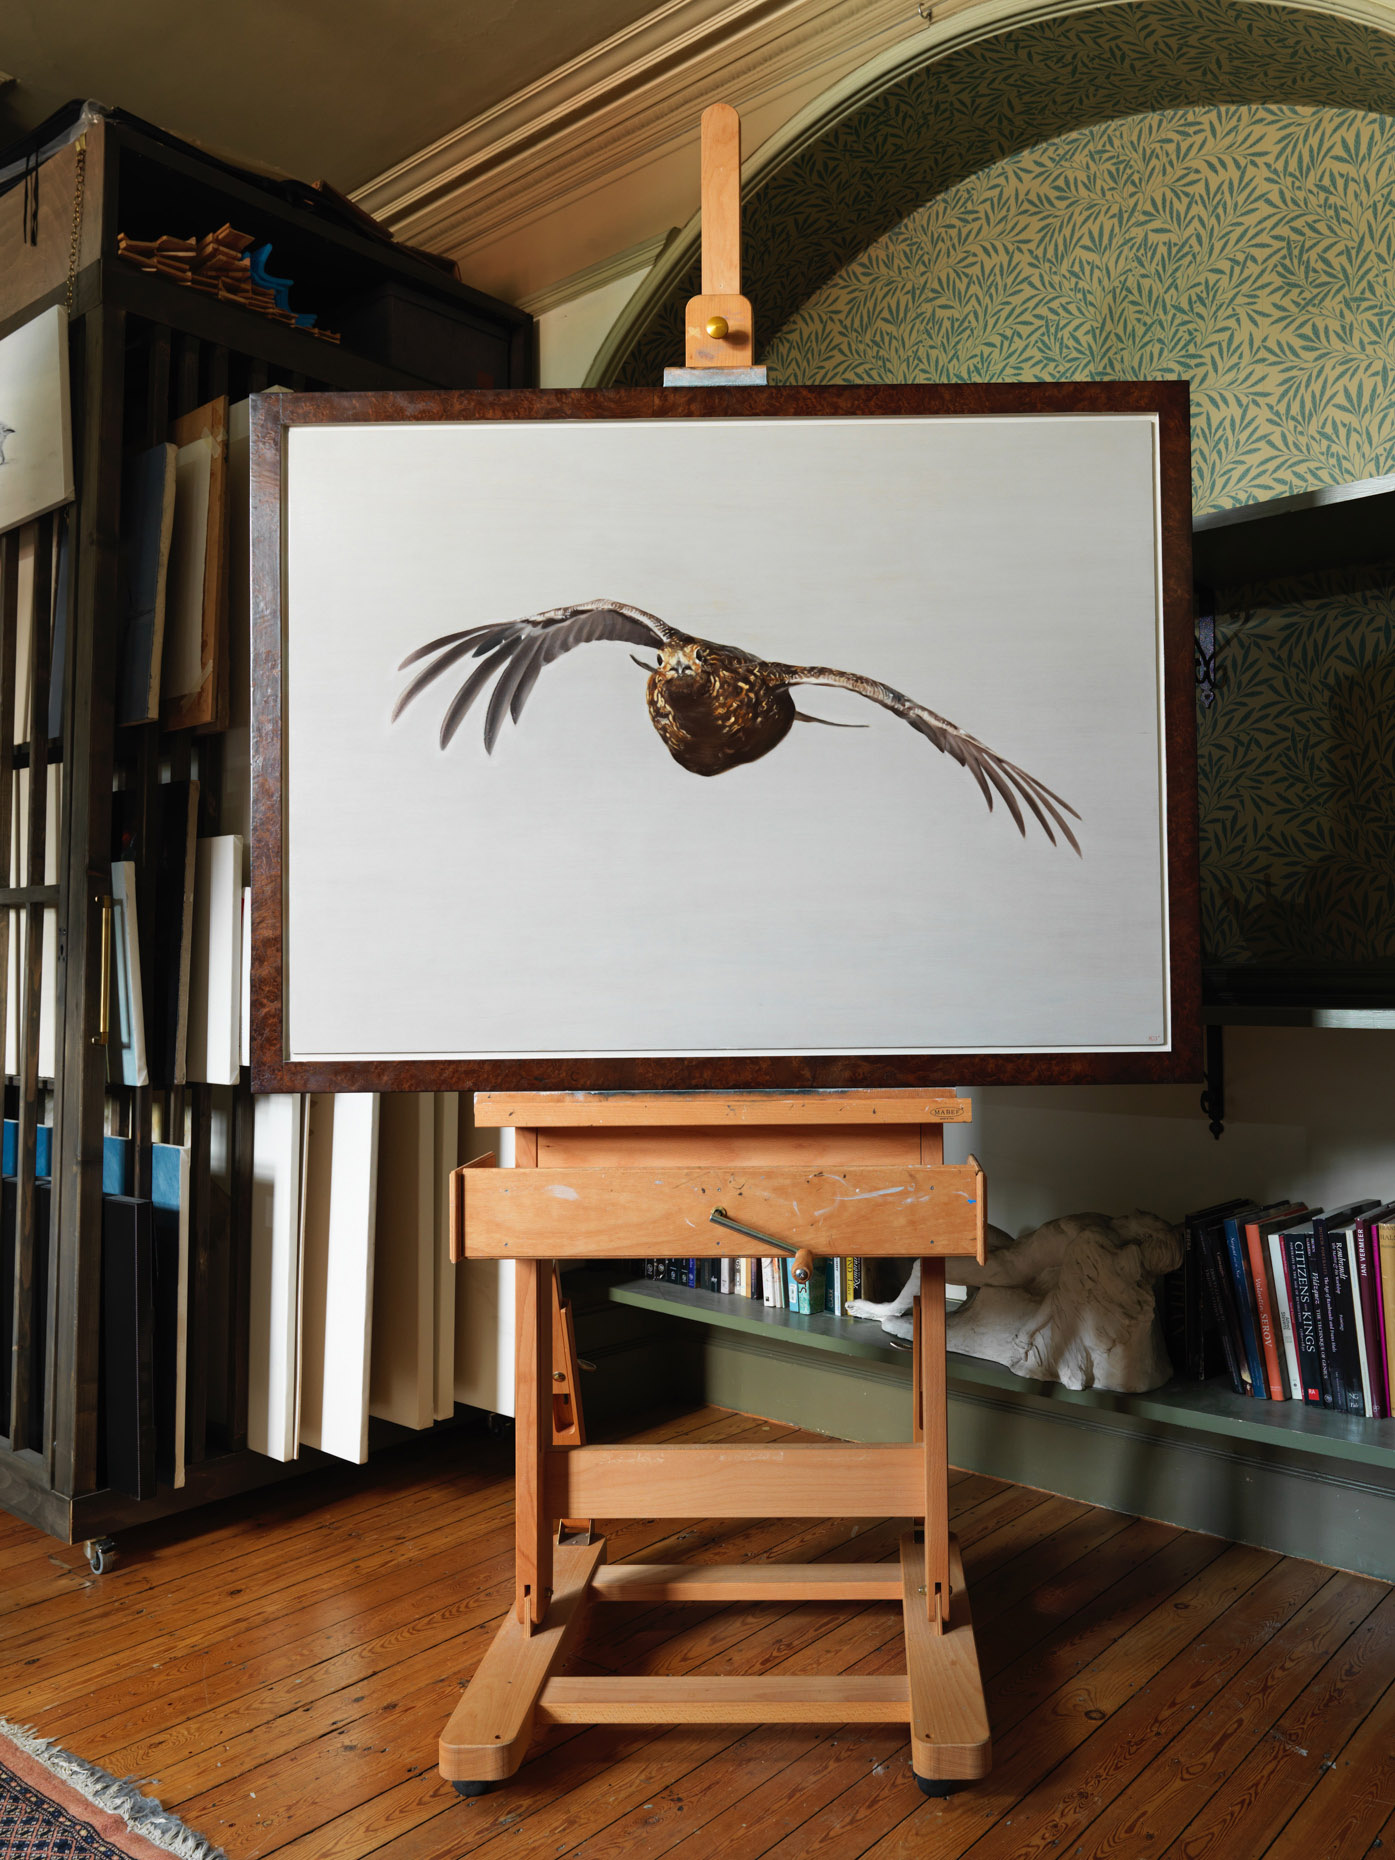 grouse bird flying painting by anna clare lees-buckley